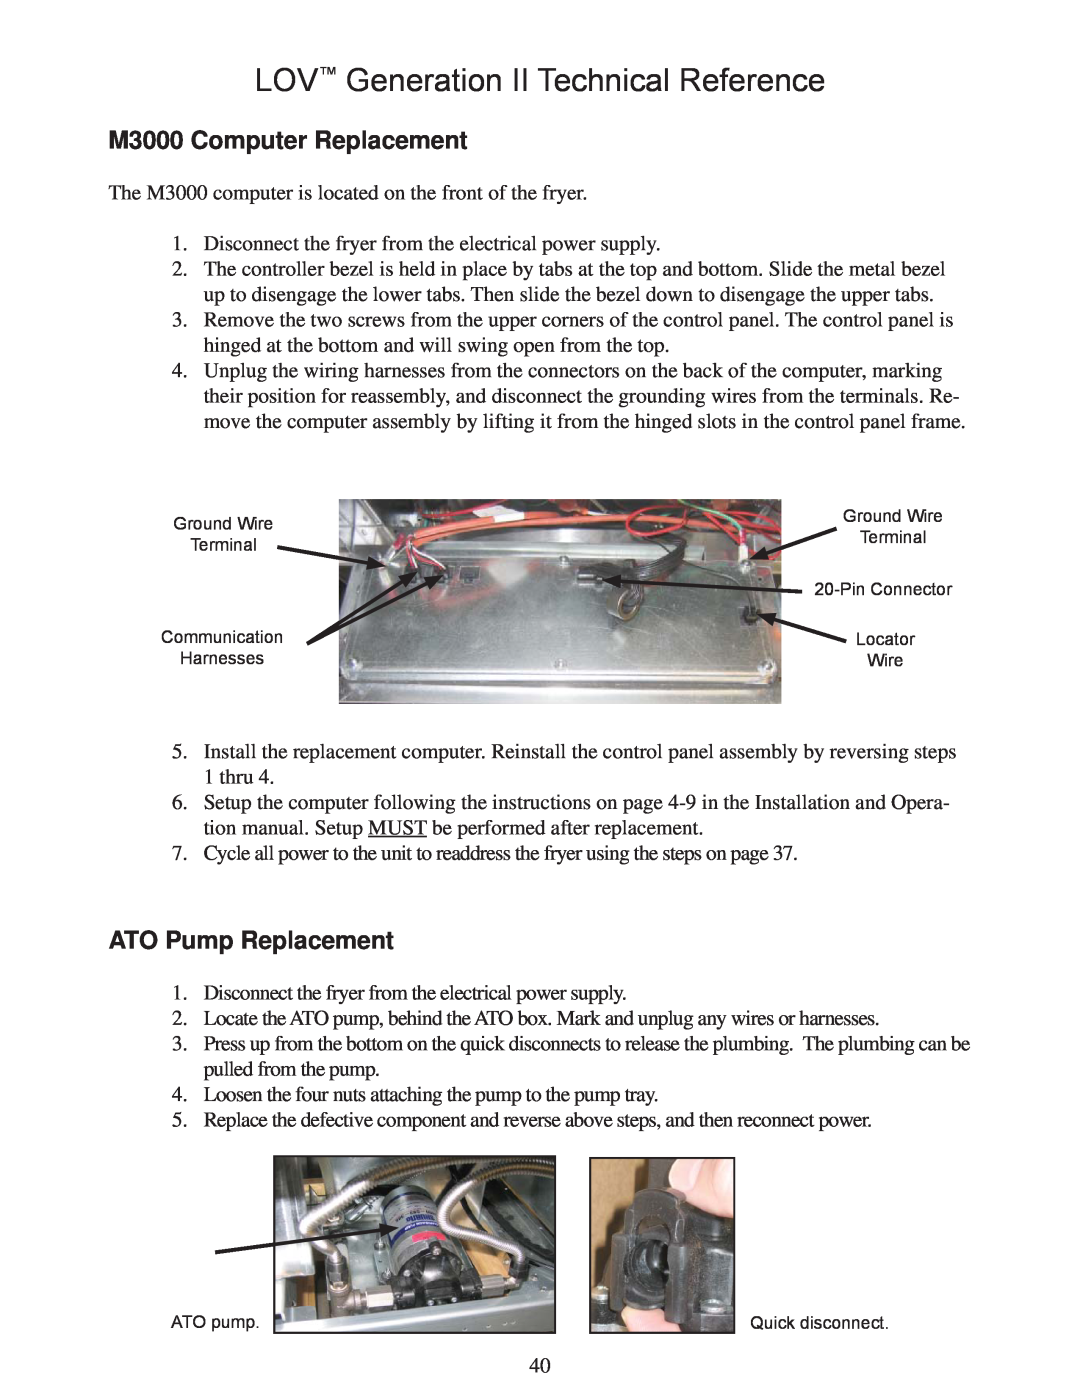 Frymaster manual M3000 Computer Replacement, ATO Pump Replacement, LOV Generation II Technical Reference 